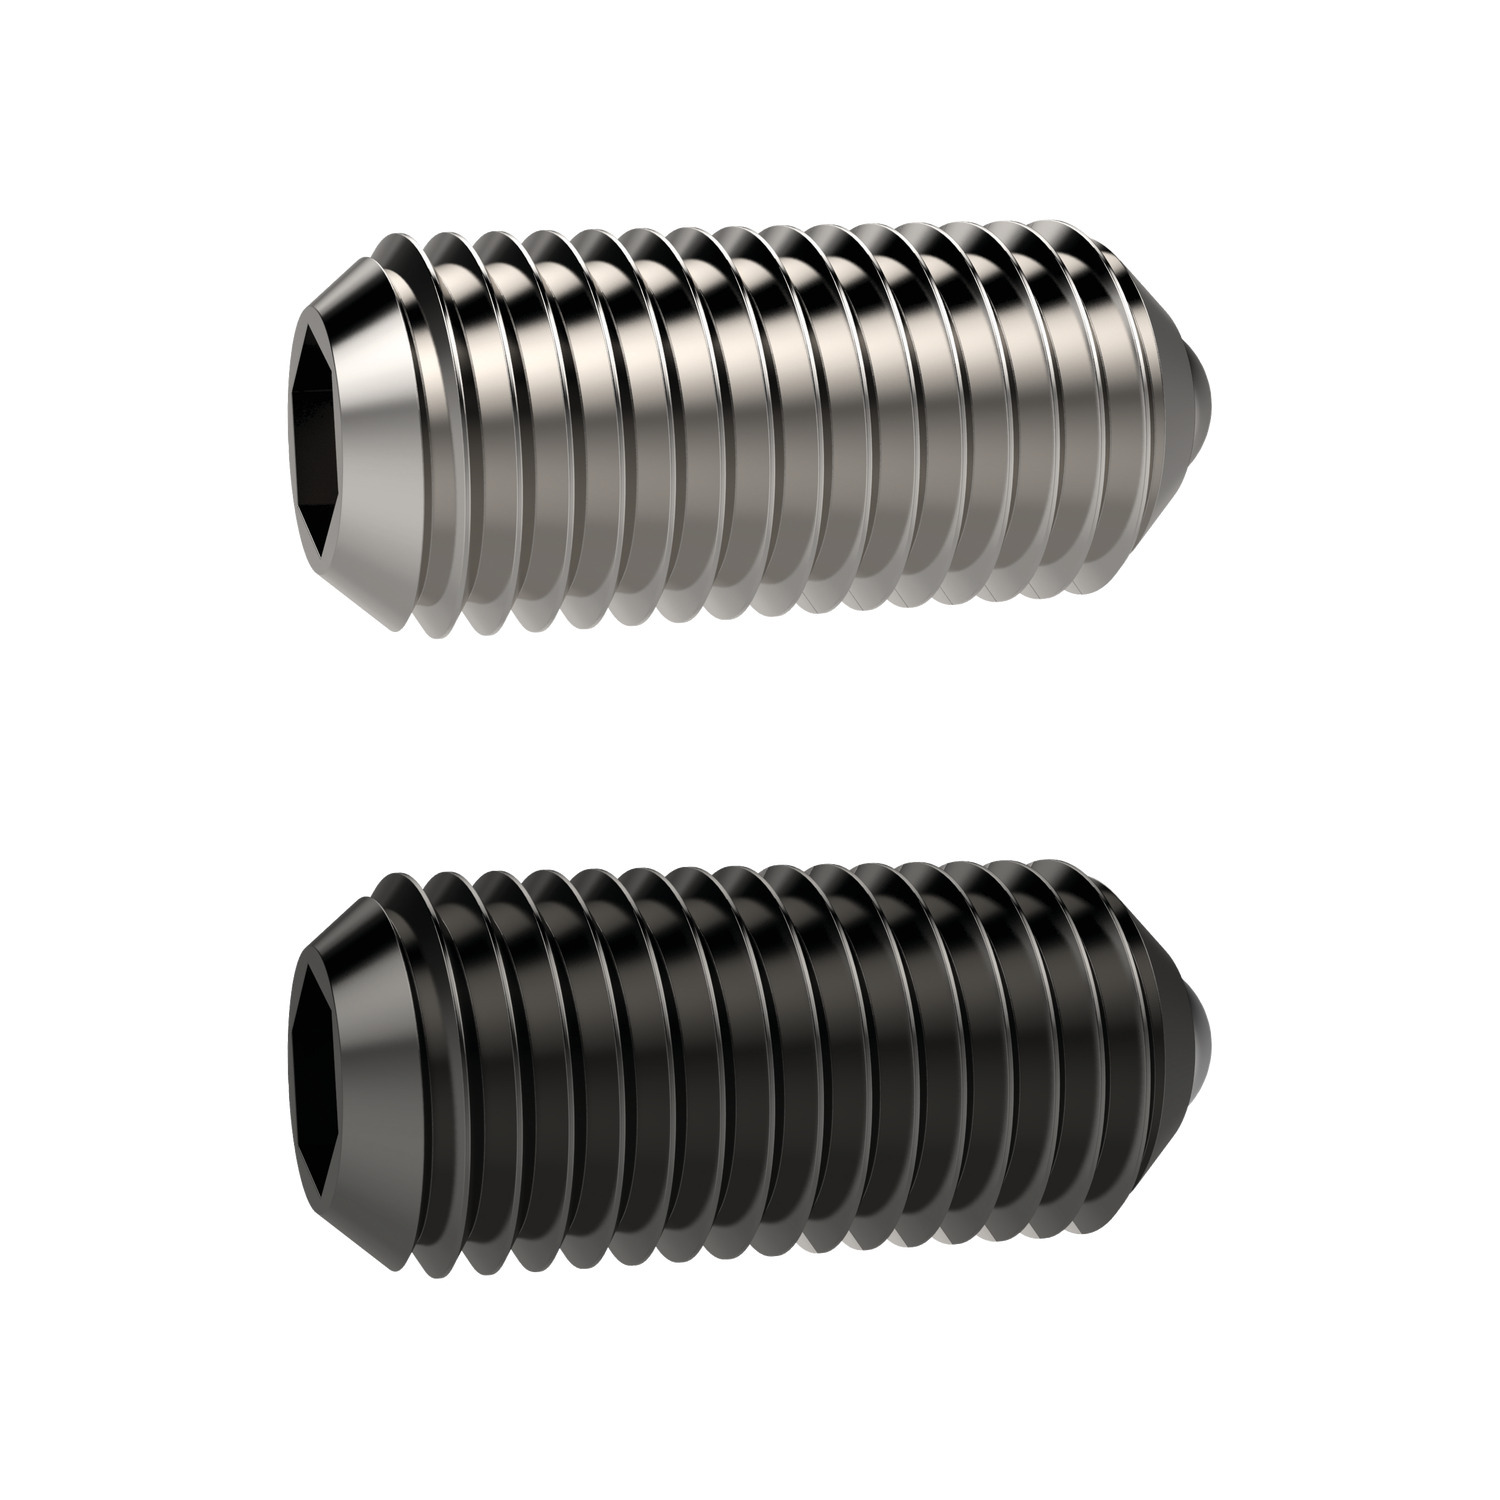 31610.W0210 Spring Plungers- Moveable Ball- S/S M10 x 23 -Stainless Steel - Standard Spring Load